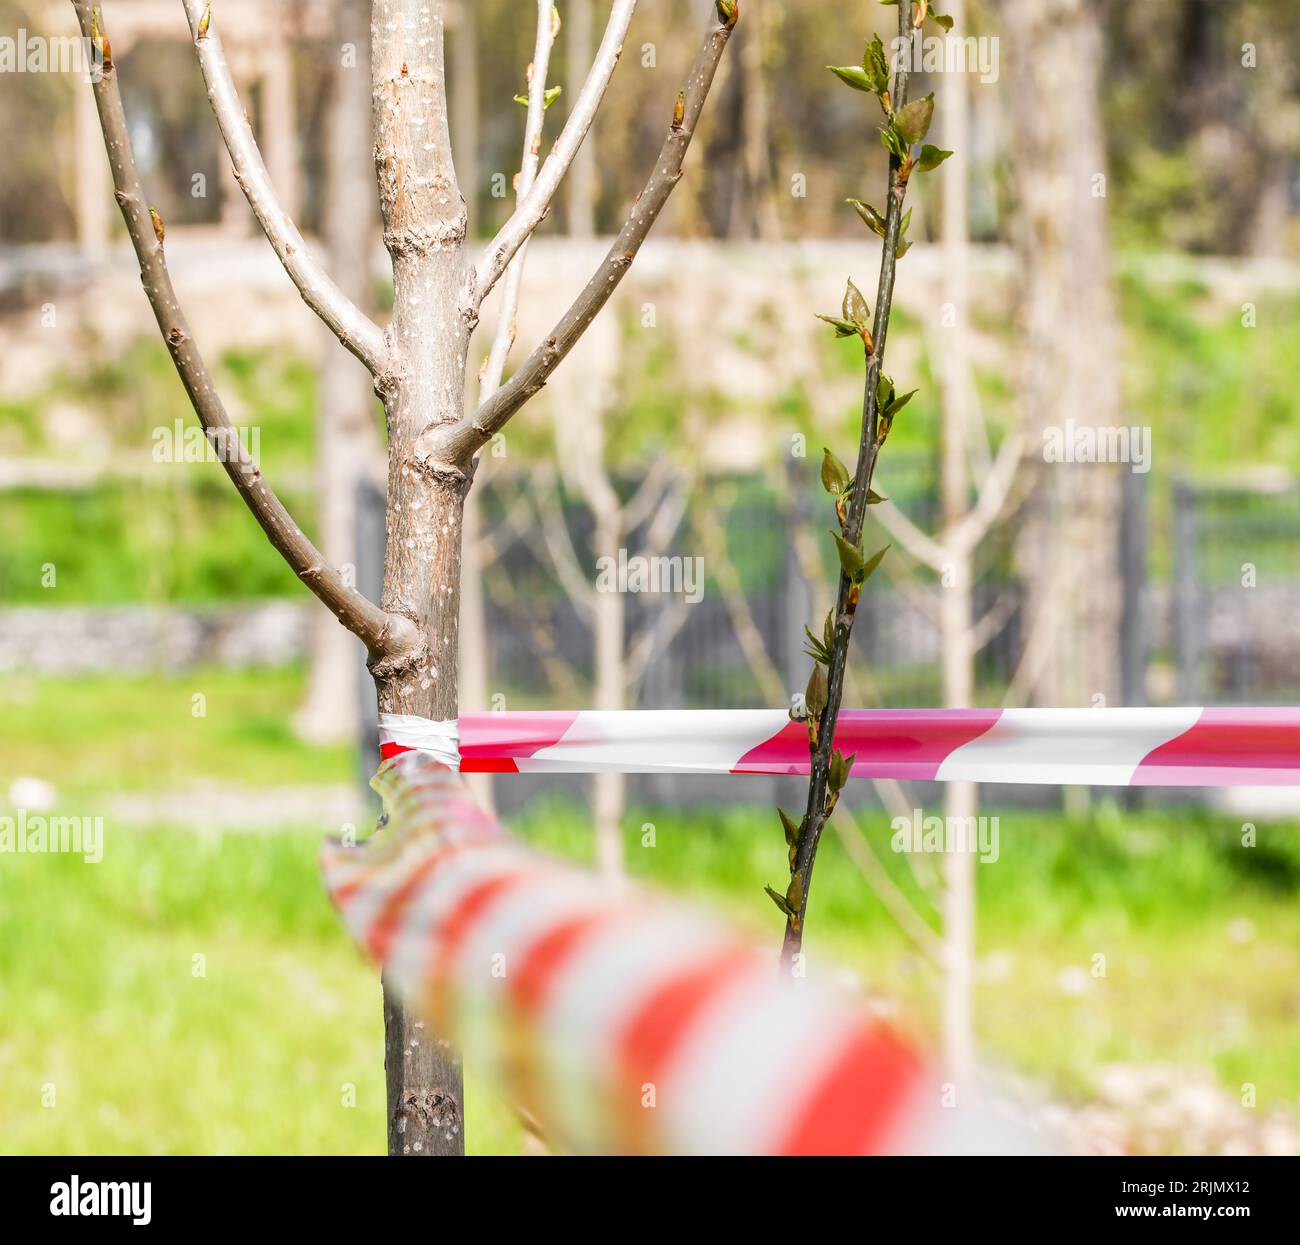 A young tree is fenced with a signal red and white ribbon. Nature conservation concept. Self-isolation. Stock Photo